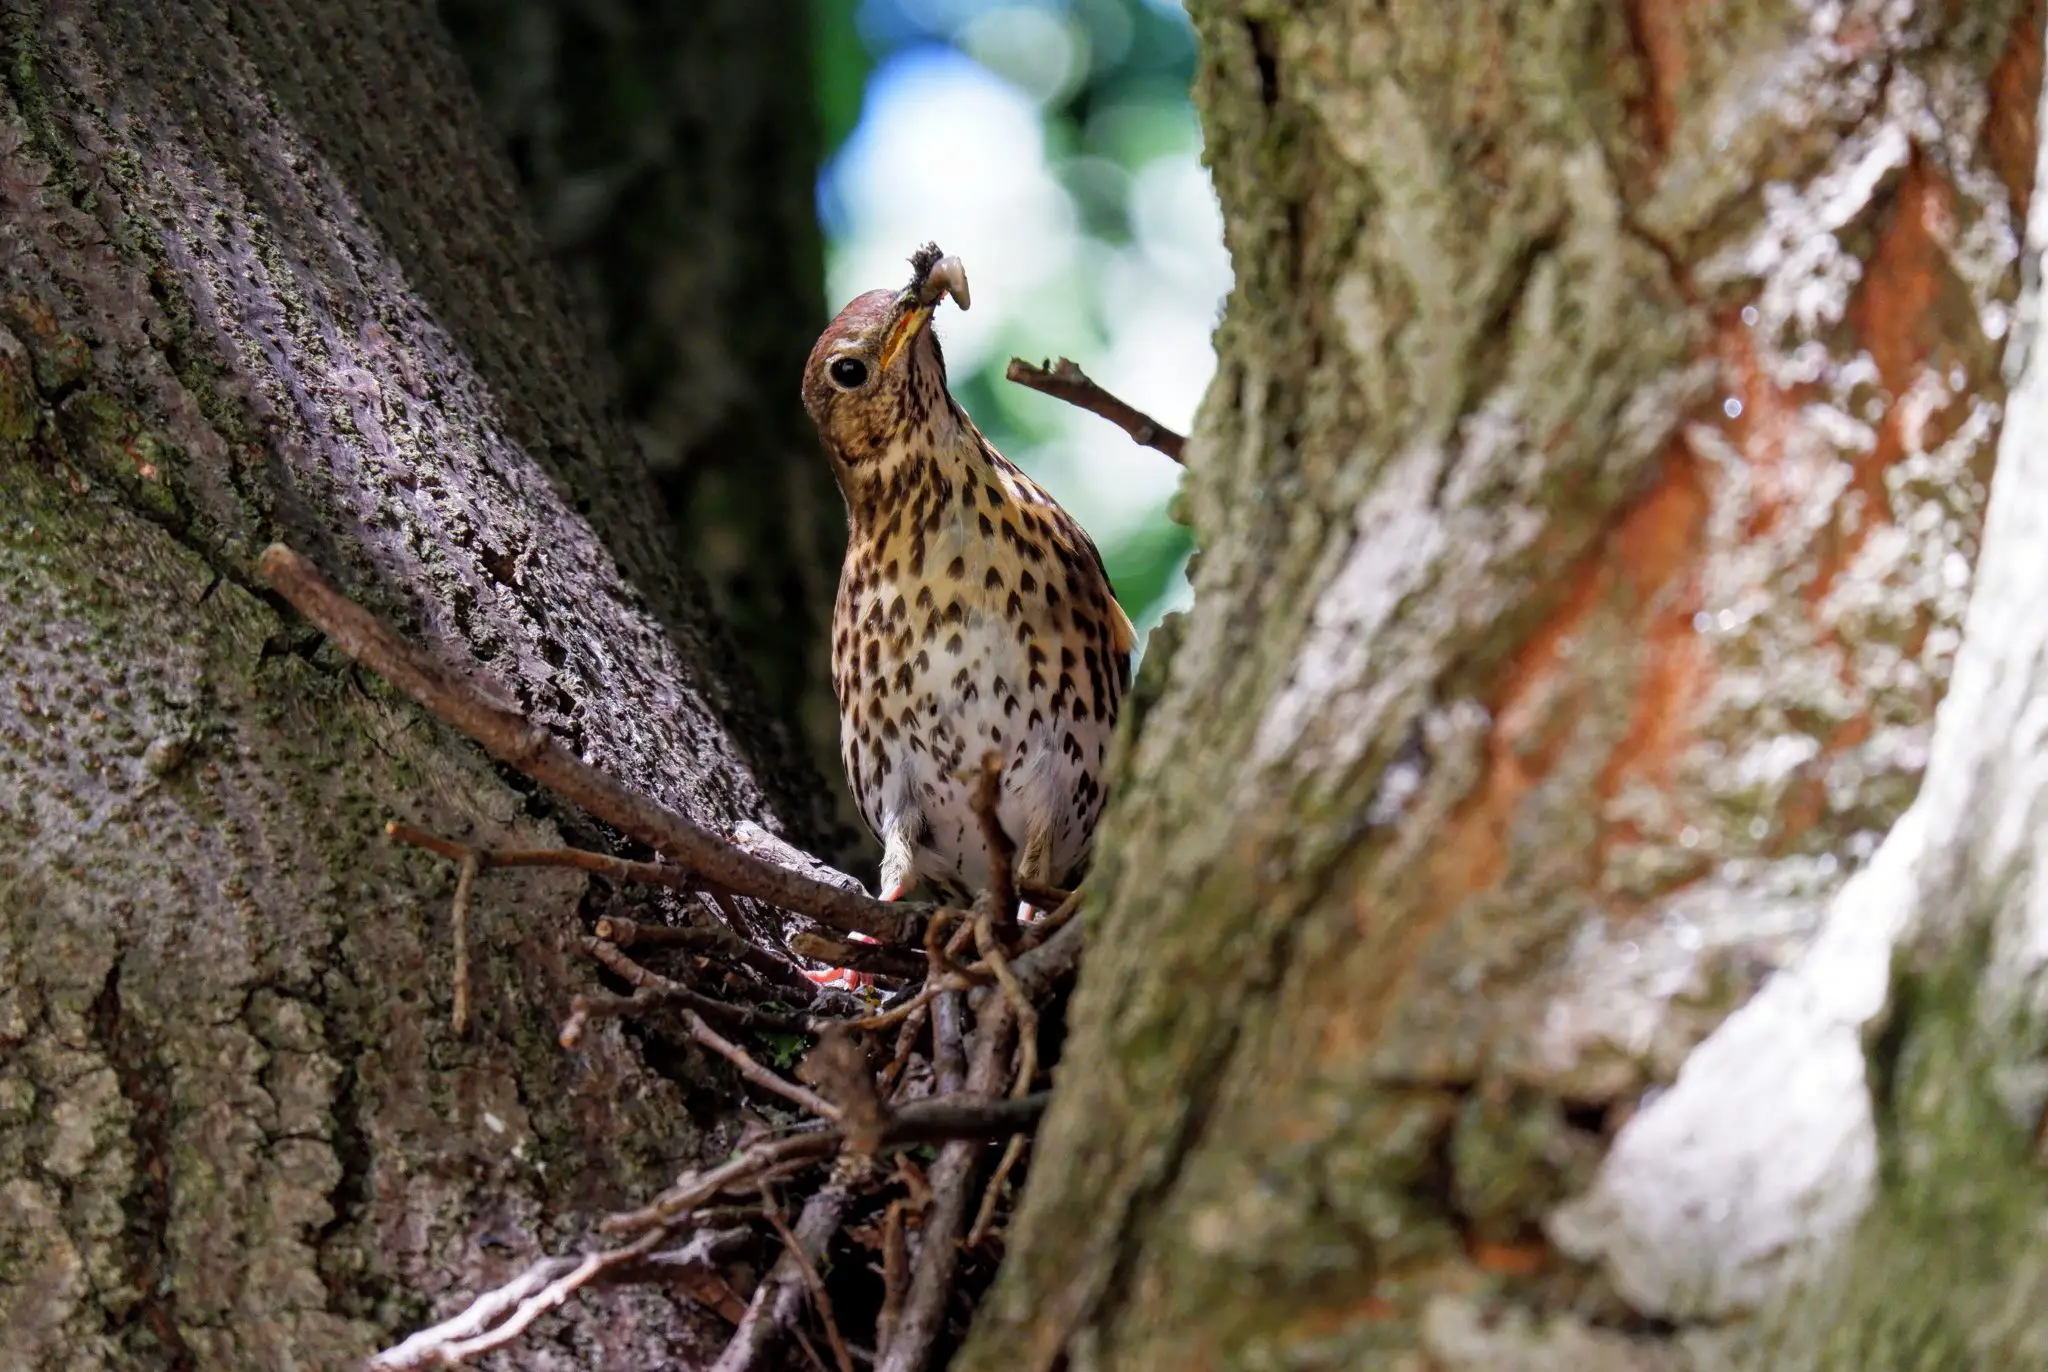 Song thrush in nest, Southern Cemetery